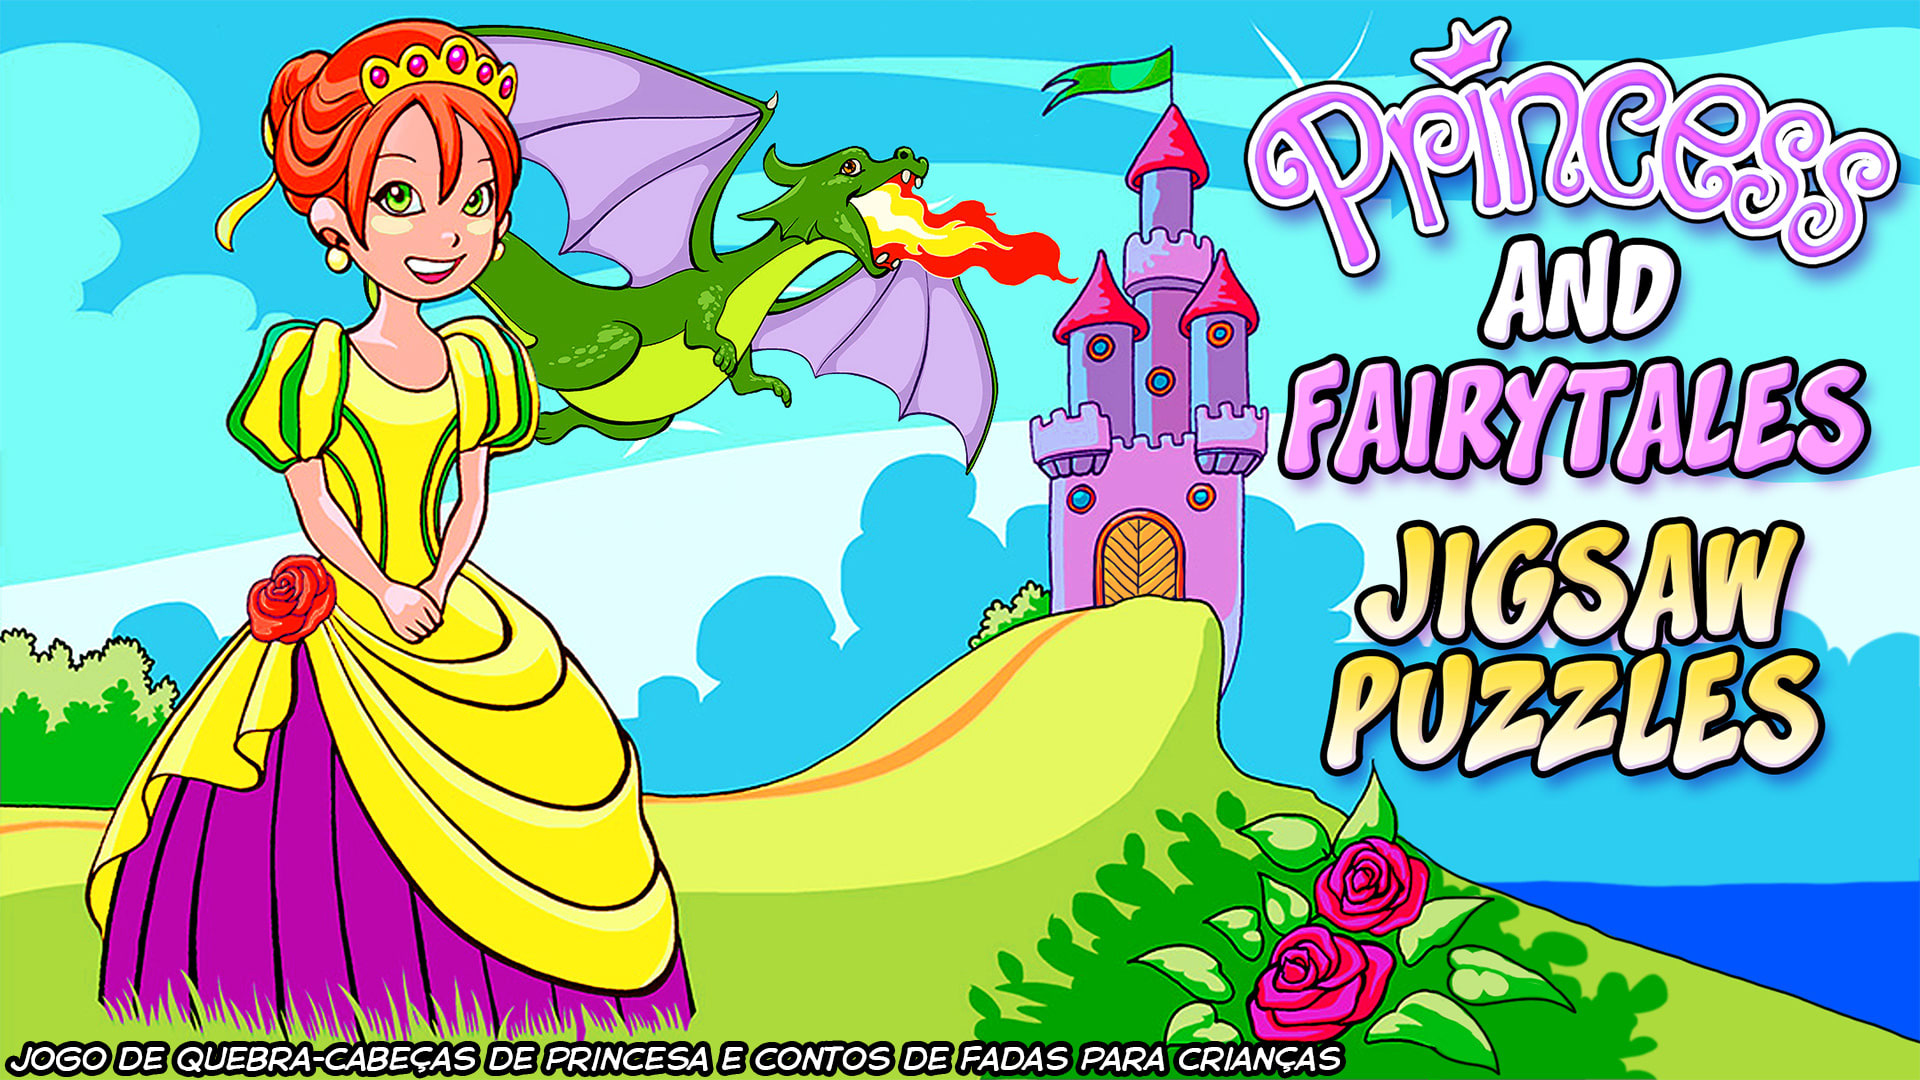 Princess and Fairytales Jigsaw Puzzles - Puzzle Game for Kids